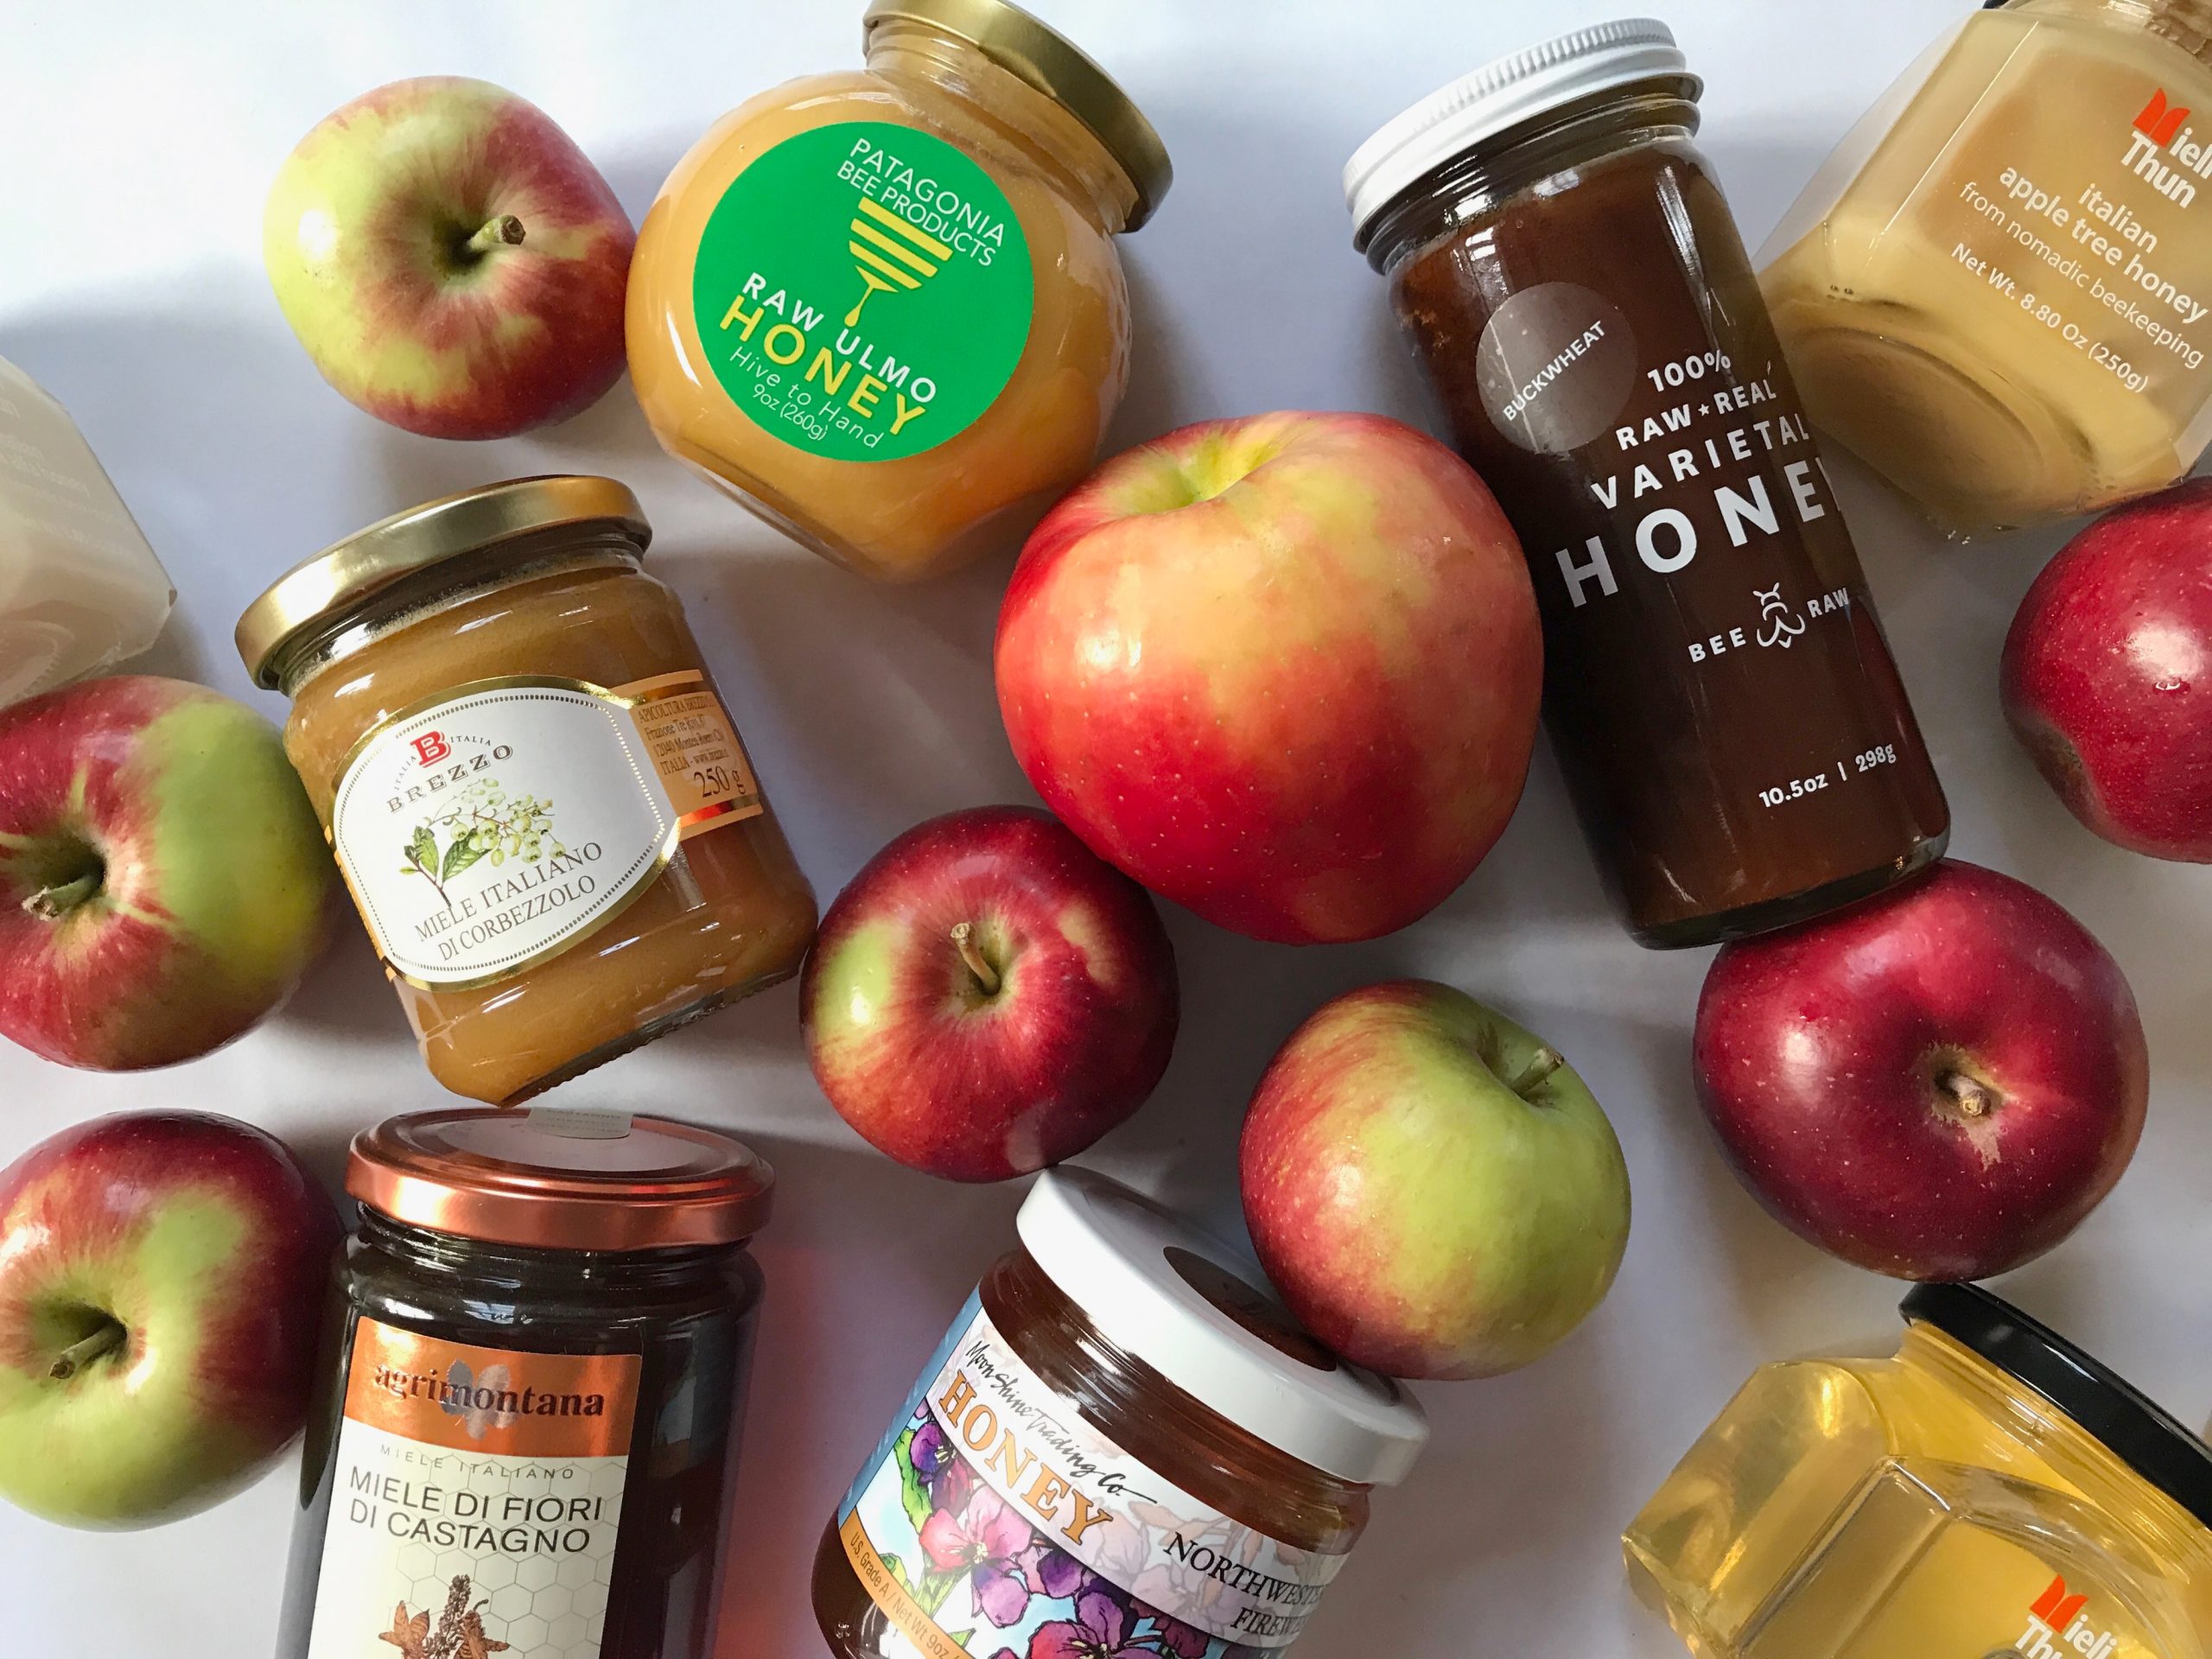 Apple Sugar Bee -  Online Kosher Grocery Shopping and  Delivery Service